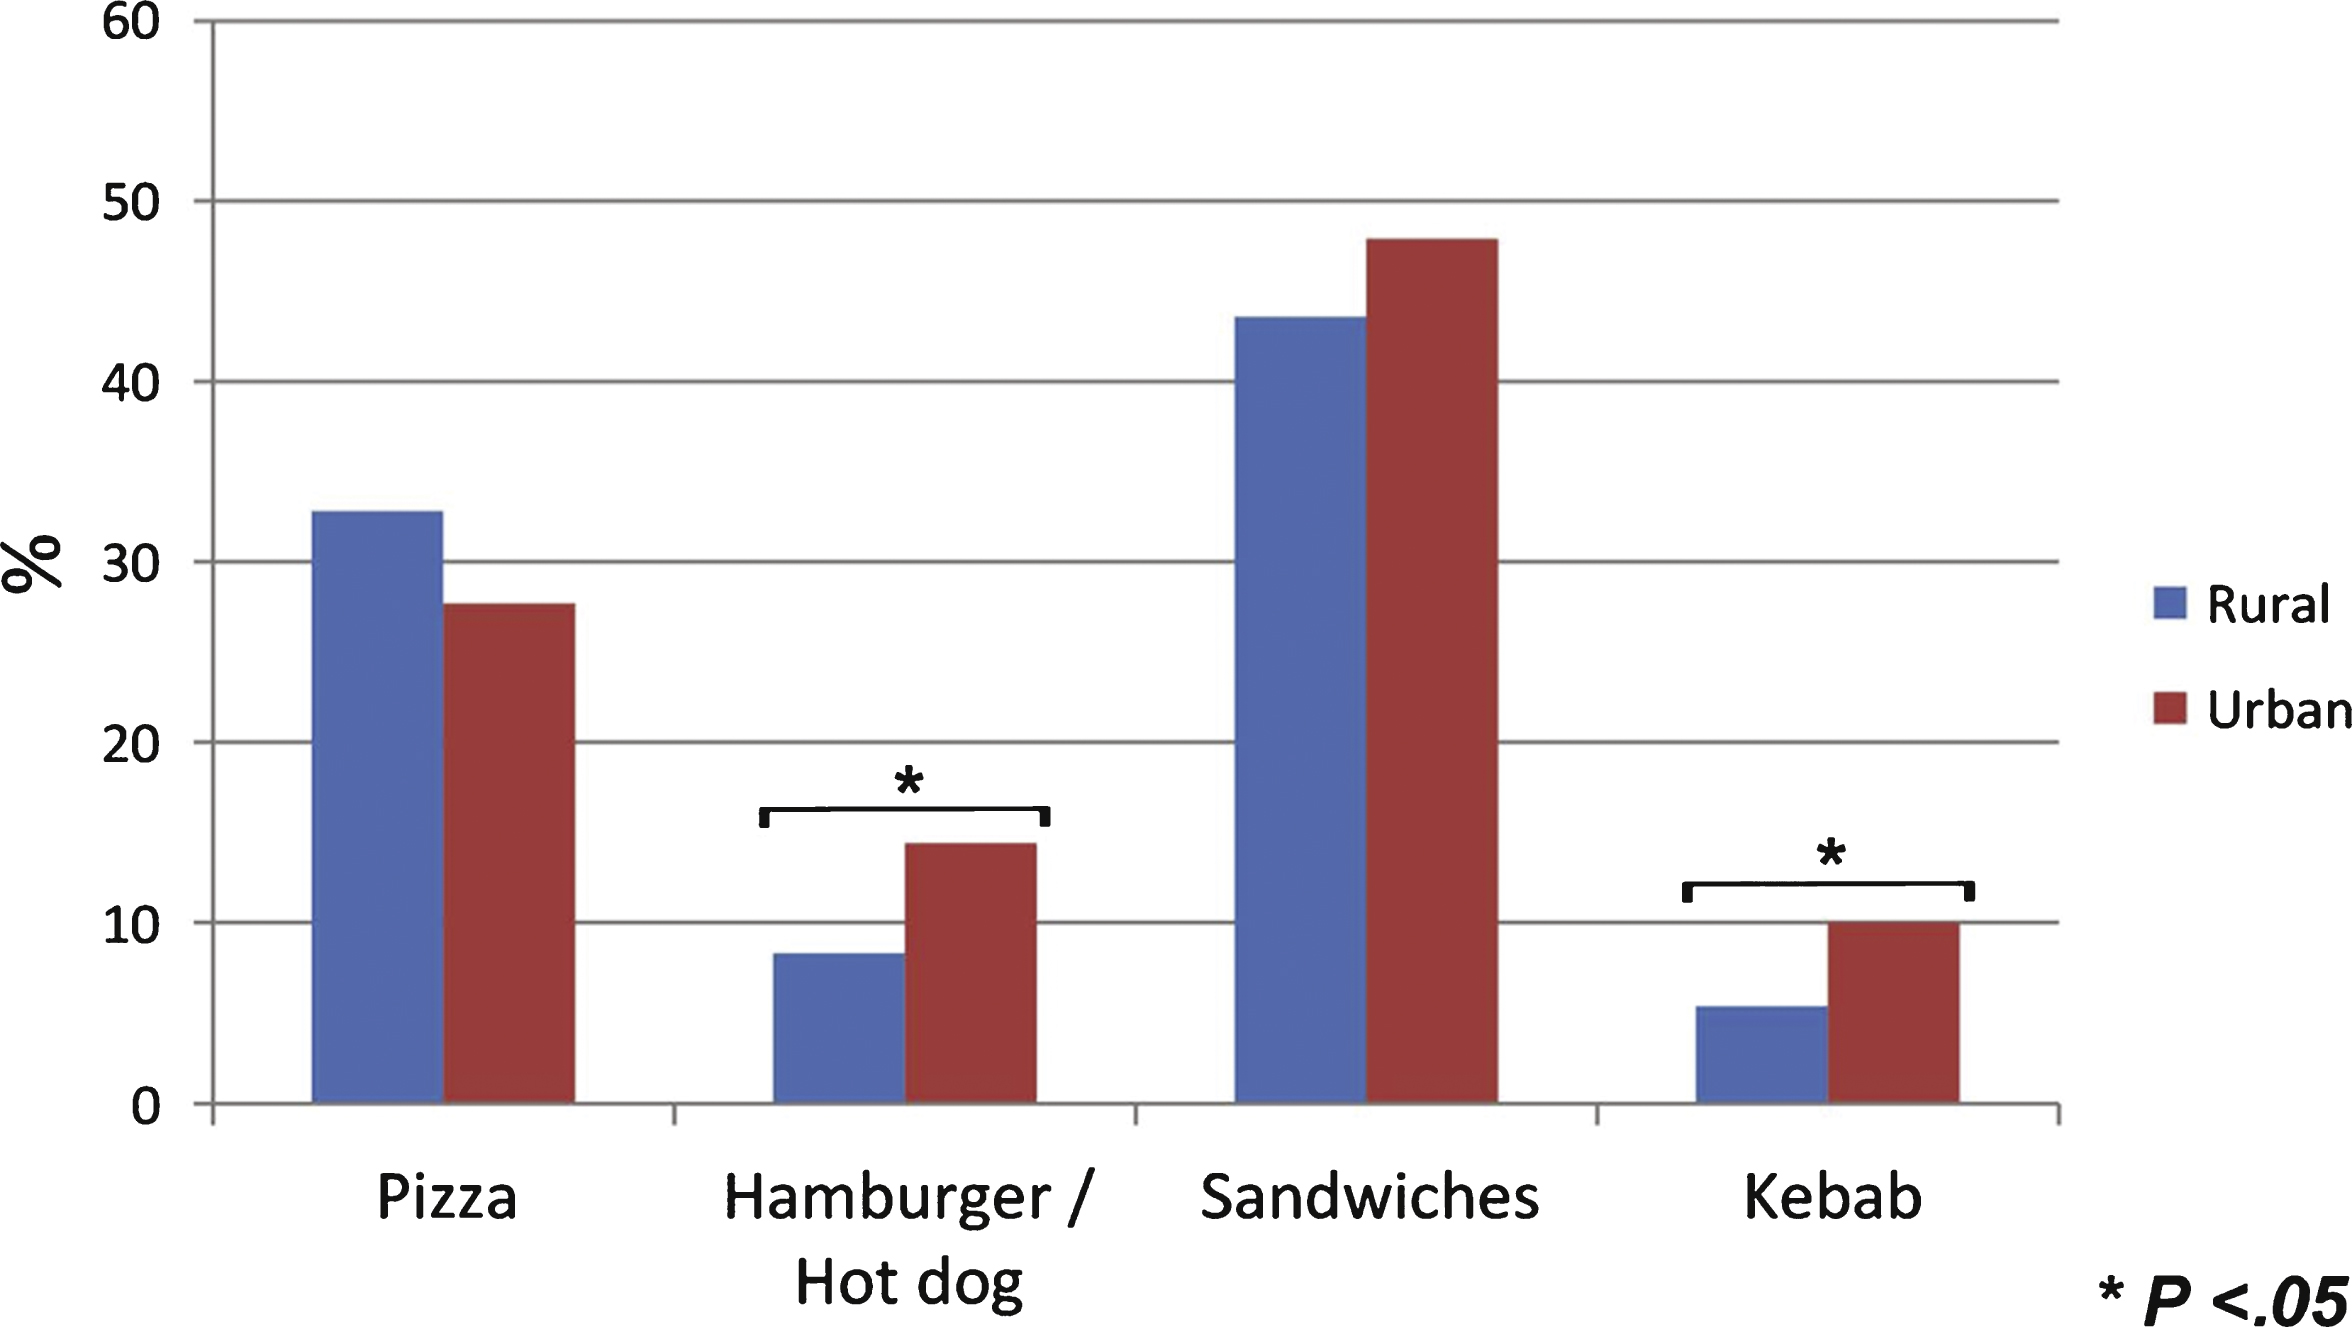 Students food preferences for fast-food, by place of living.